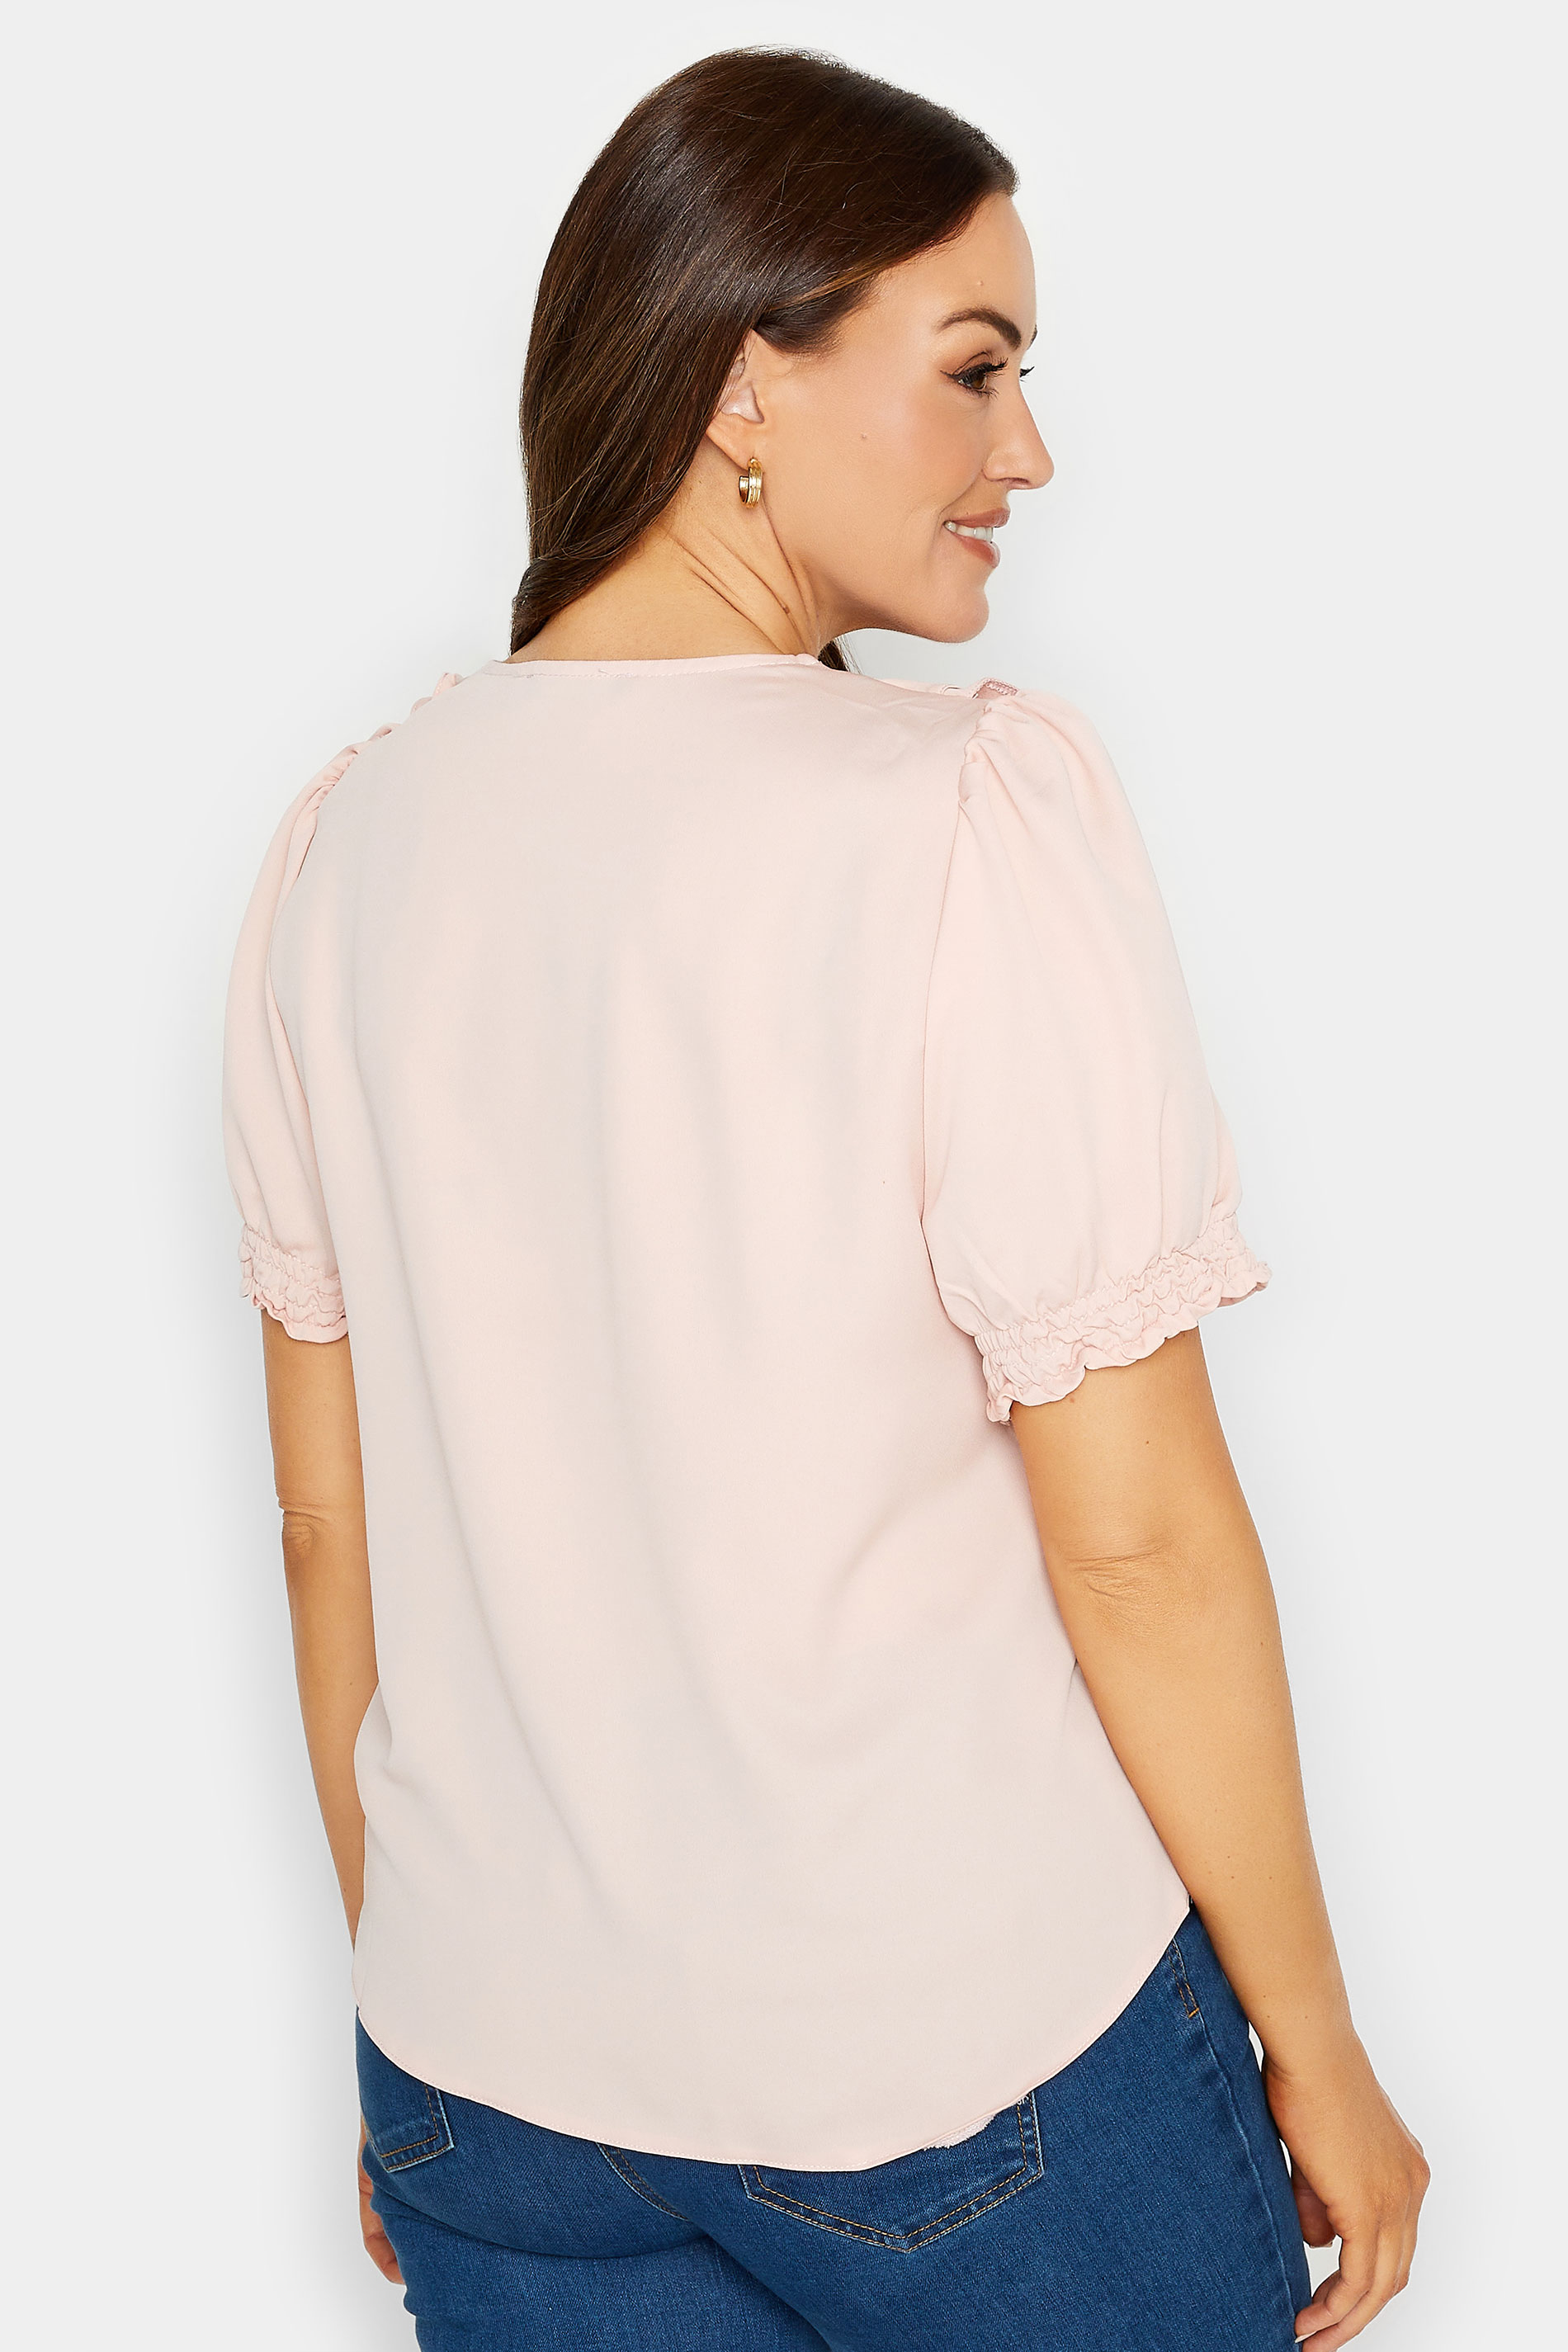 M&Co Light Pink Frill Front Blouse | M&Co 3